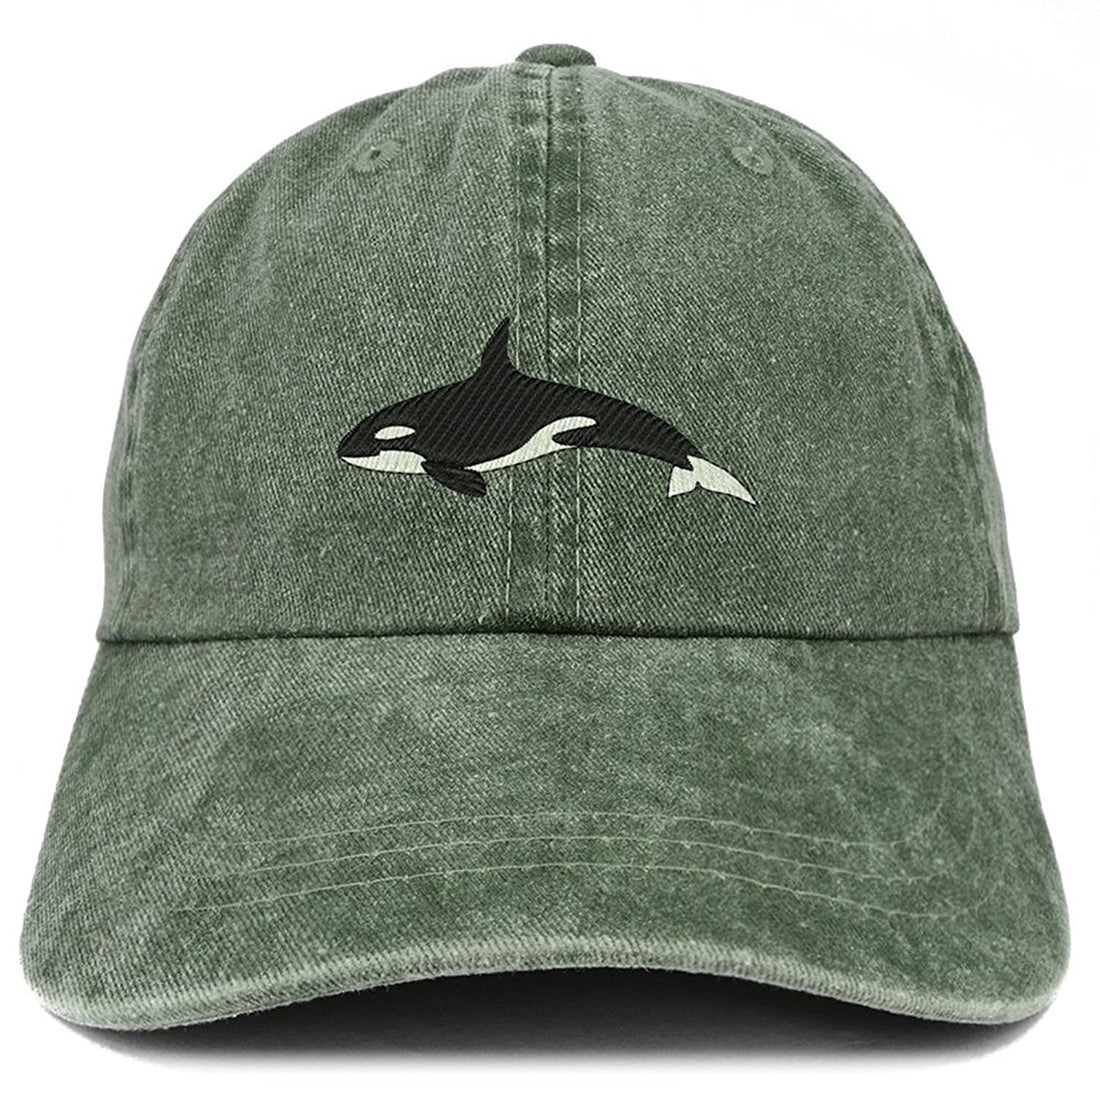 Trendy Apparel Shop Orca Killer Whale Embroidered Pigment Dyed 100% Cotton Cap